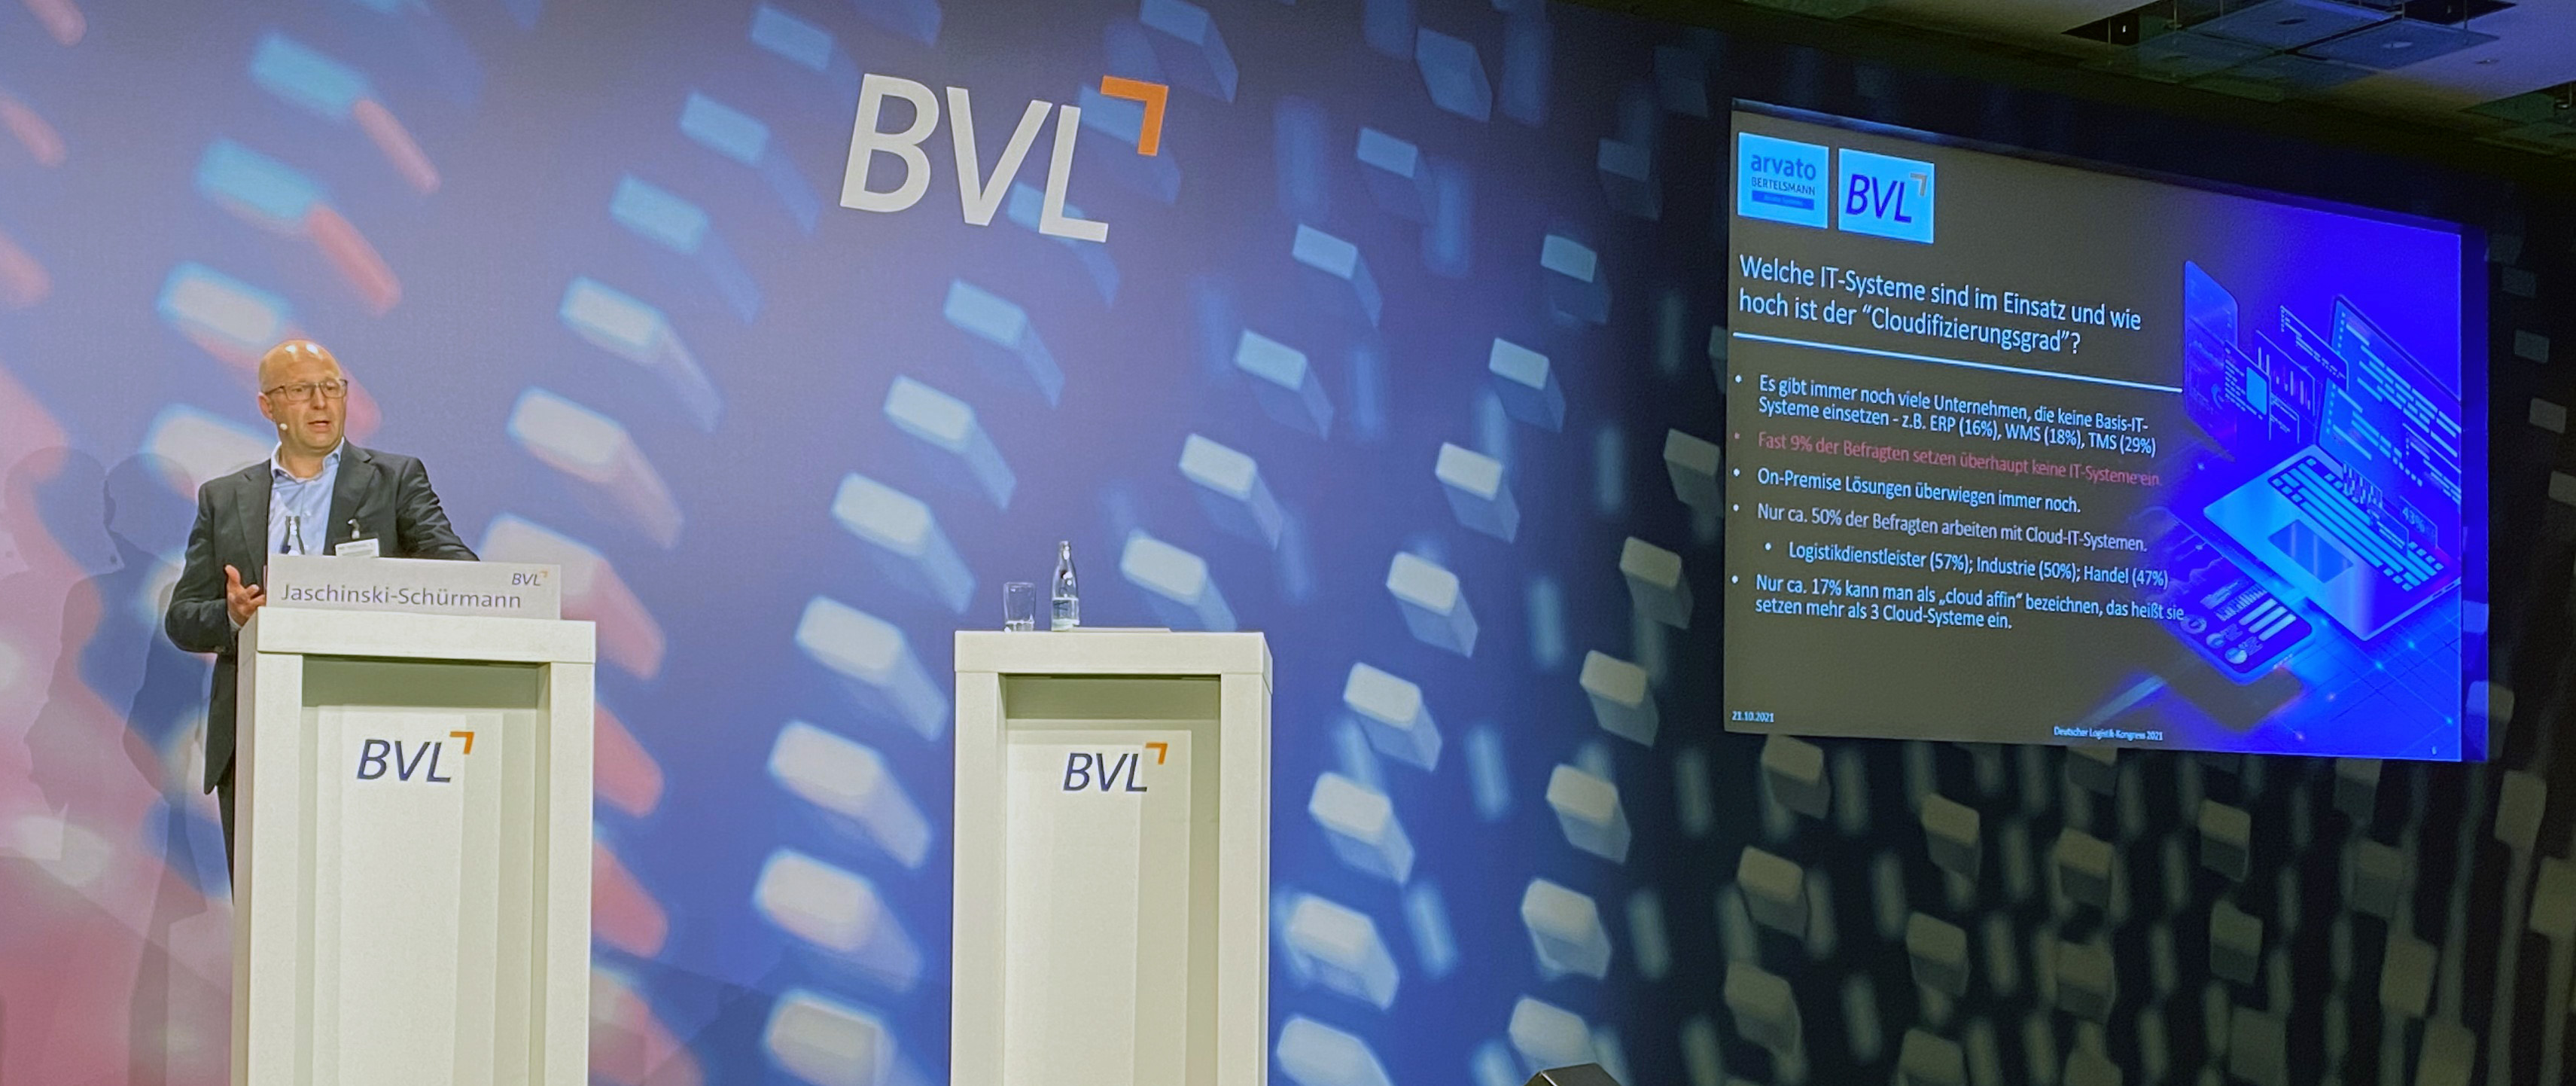 Joint logistics study by Arvato Systems and BVL.